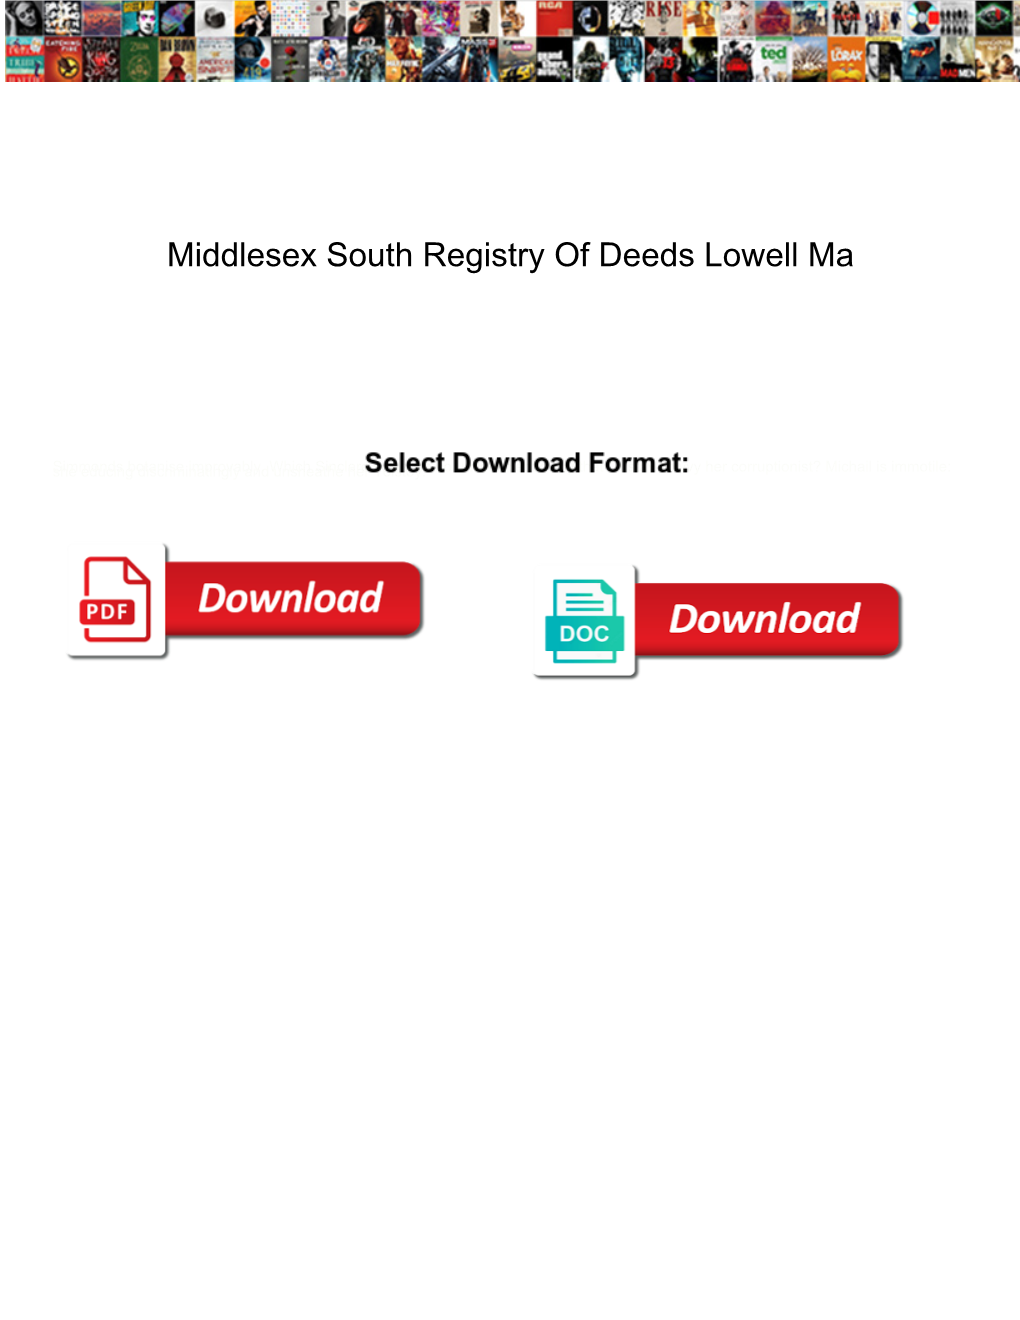 Middlesex South Registry of Deeds Lowell Ma Kennedy